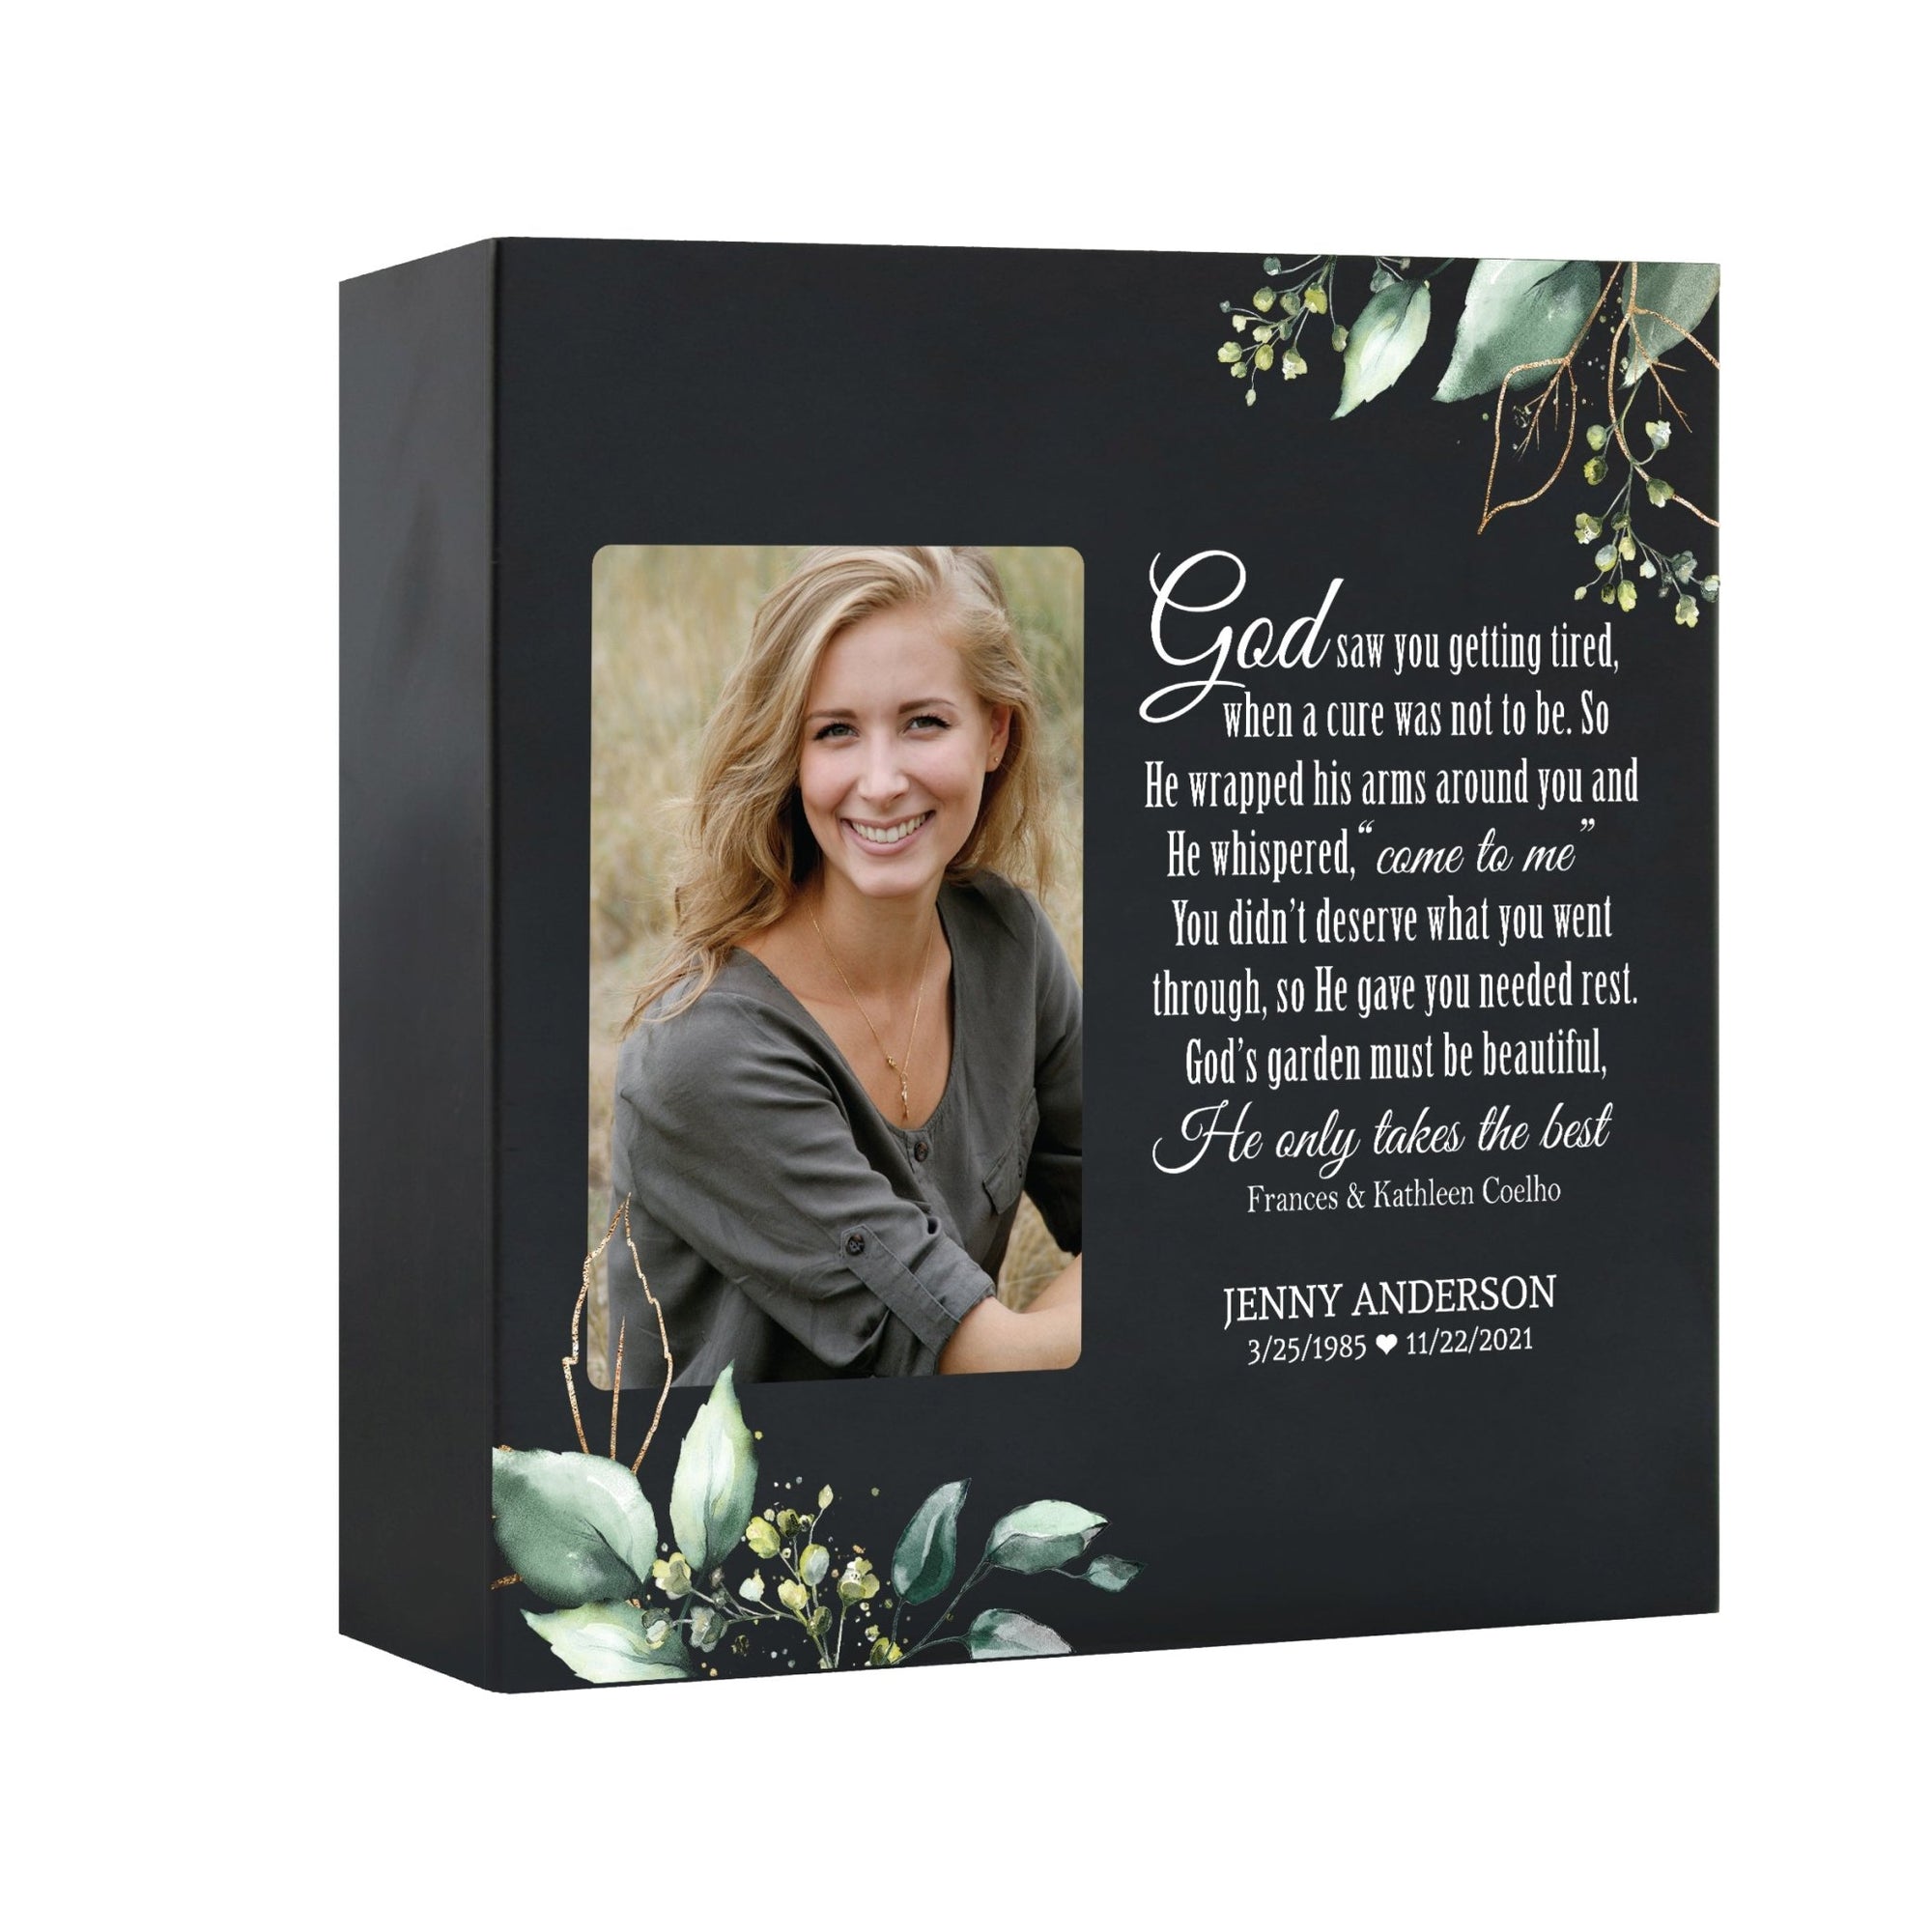 Timeless Human Memorial Shadow Box Photo Urn in Black - God Saw You Getting Tired - LifeSong Milestones